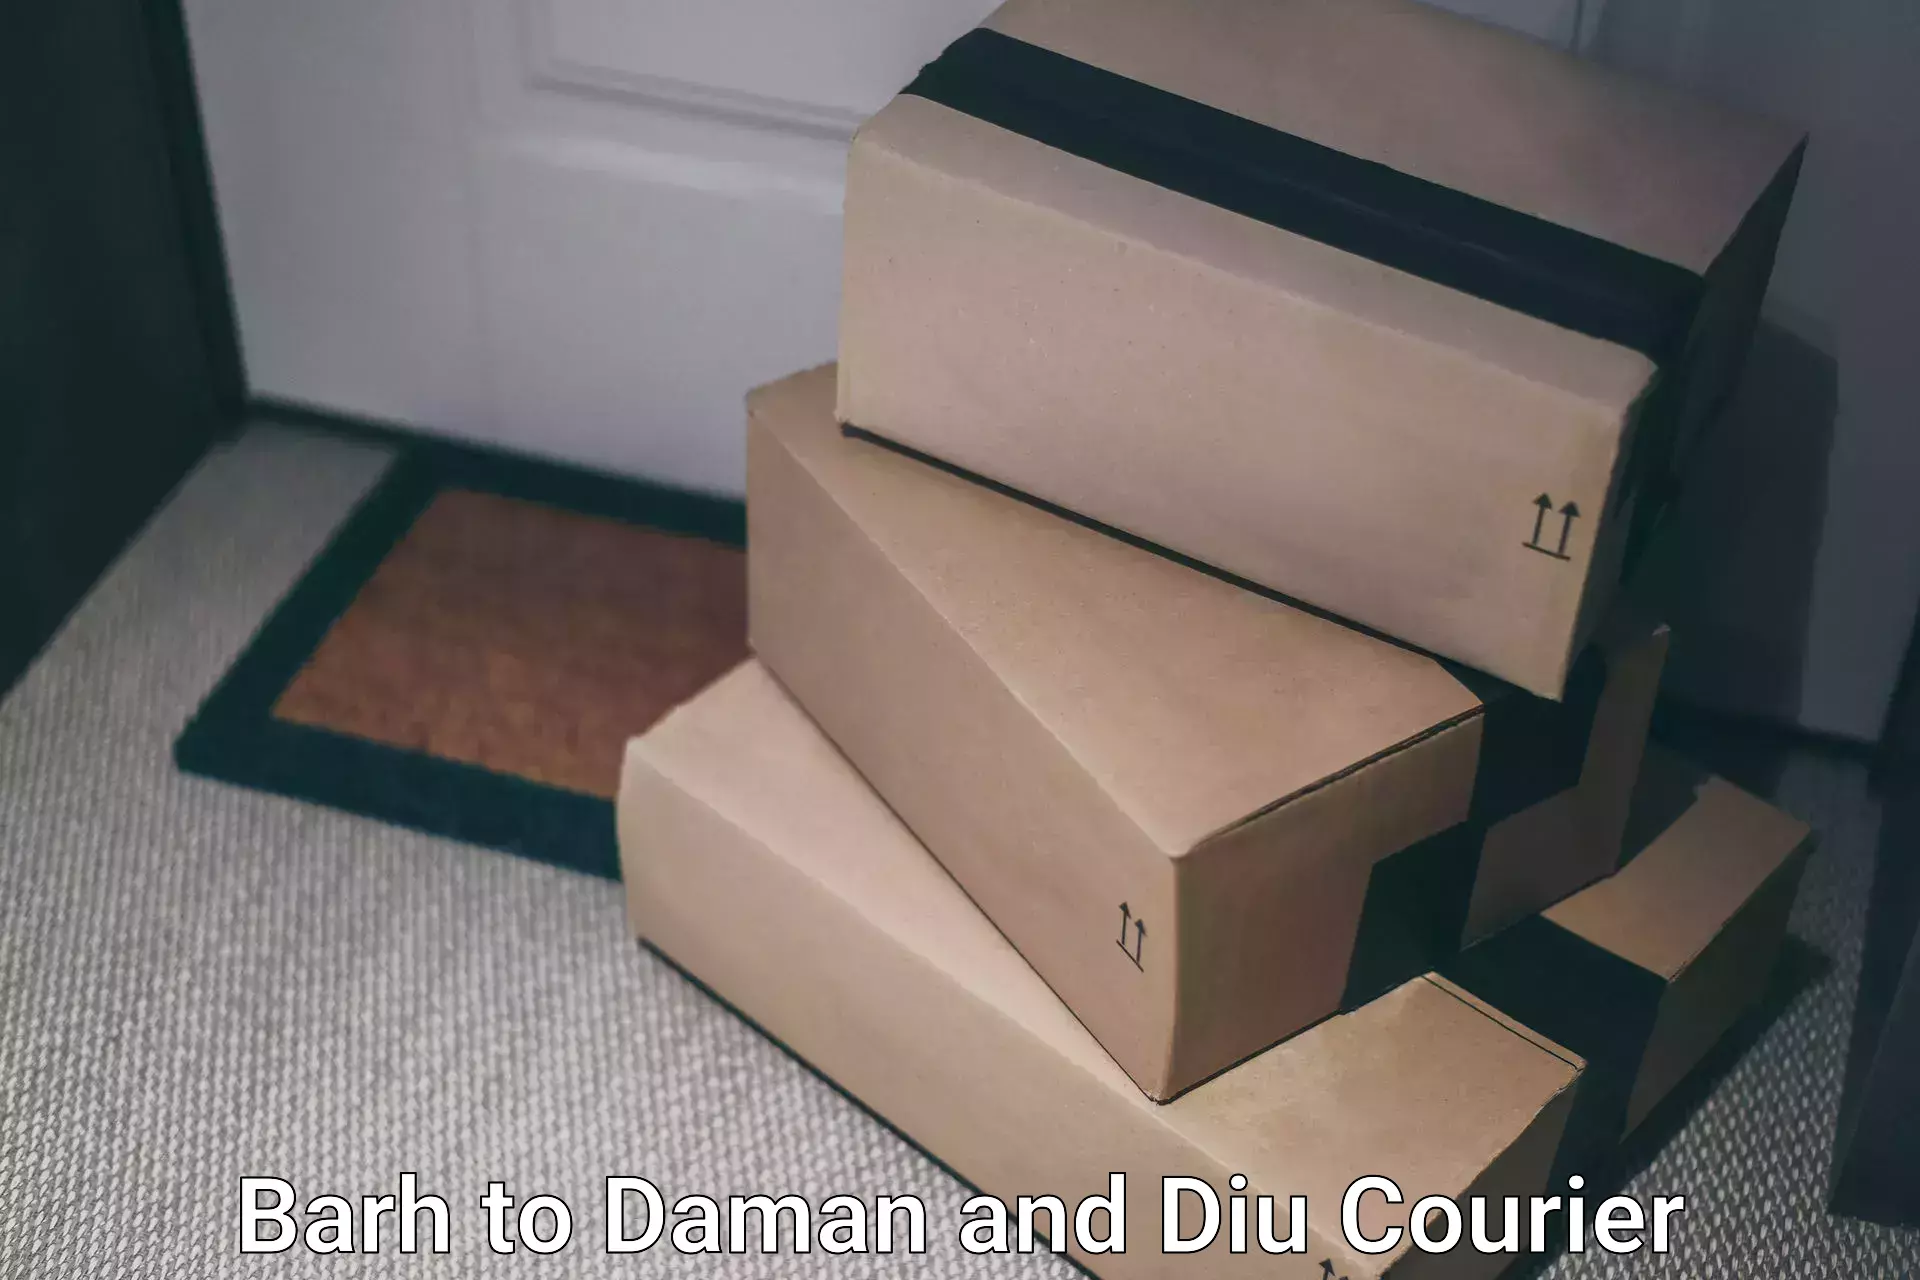 Full-service courier options Barh to Daman